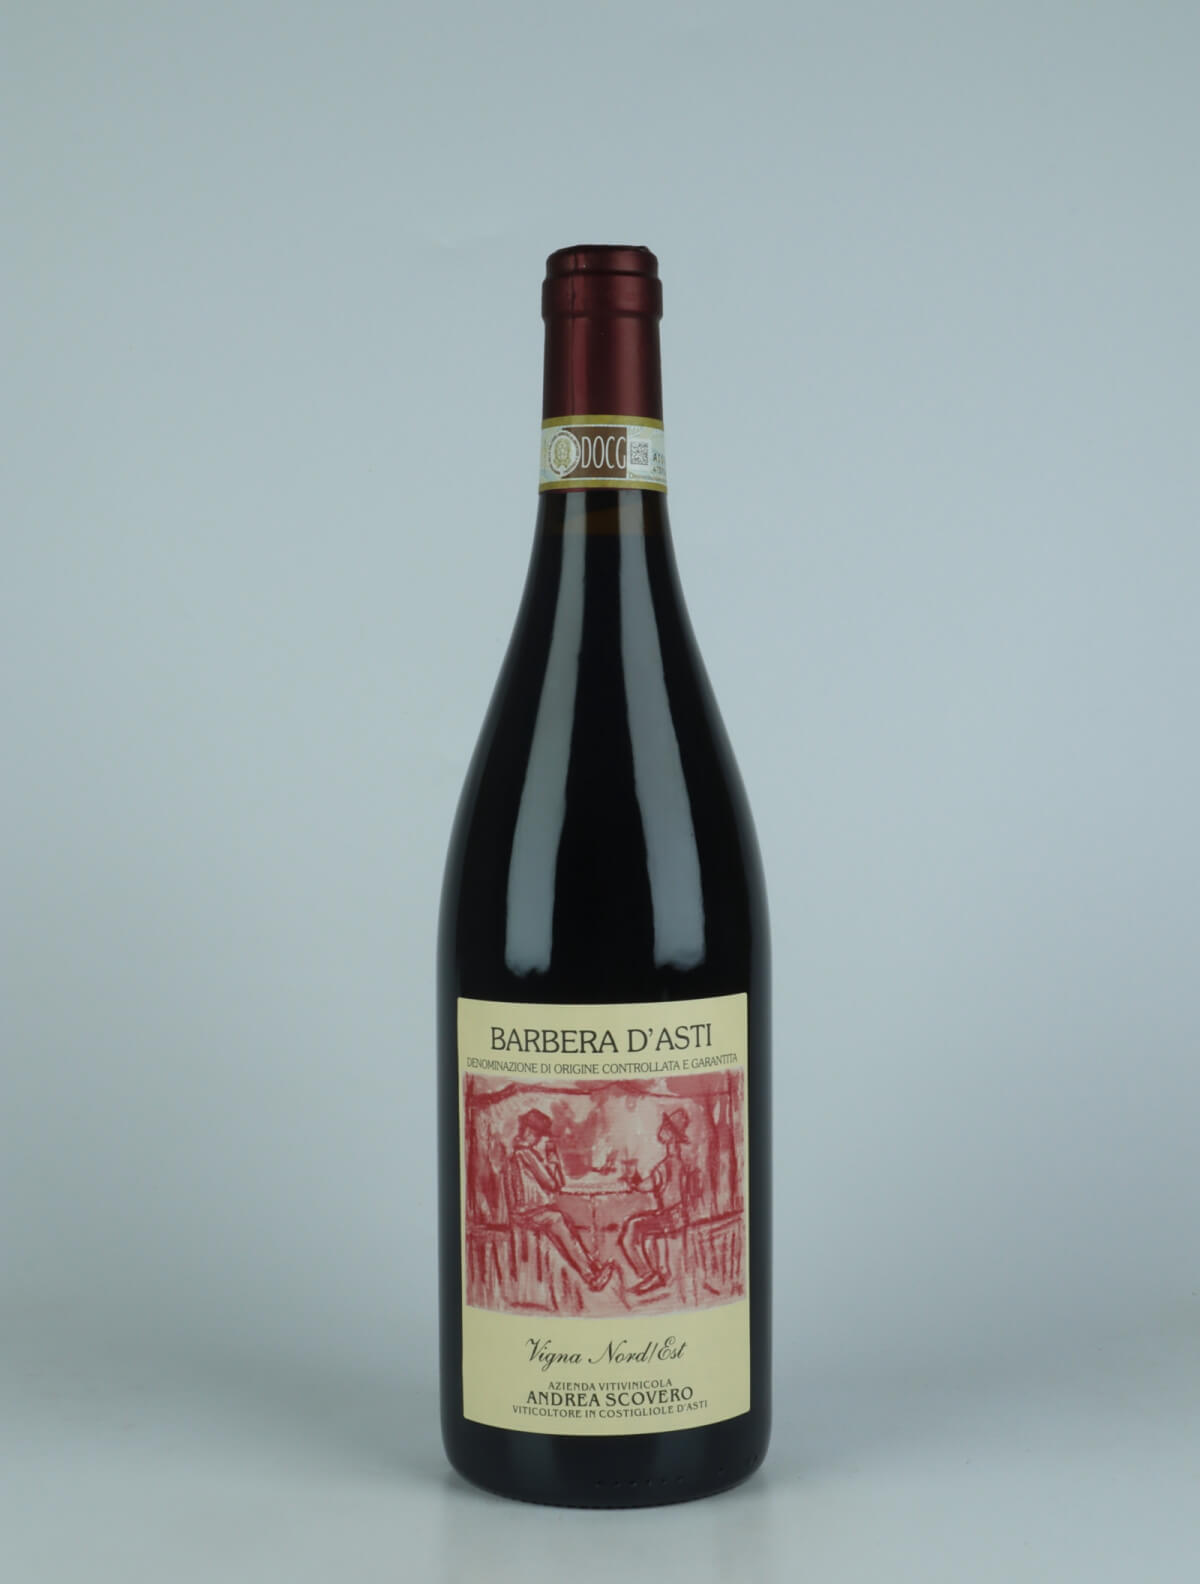 A bottle 2021 Barbera d'Asti - Vigna Nord-Est Red wine from Andrea Scovero, Piedmont in Italy